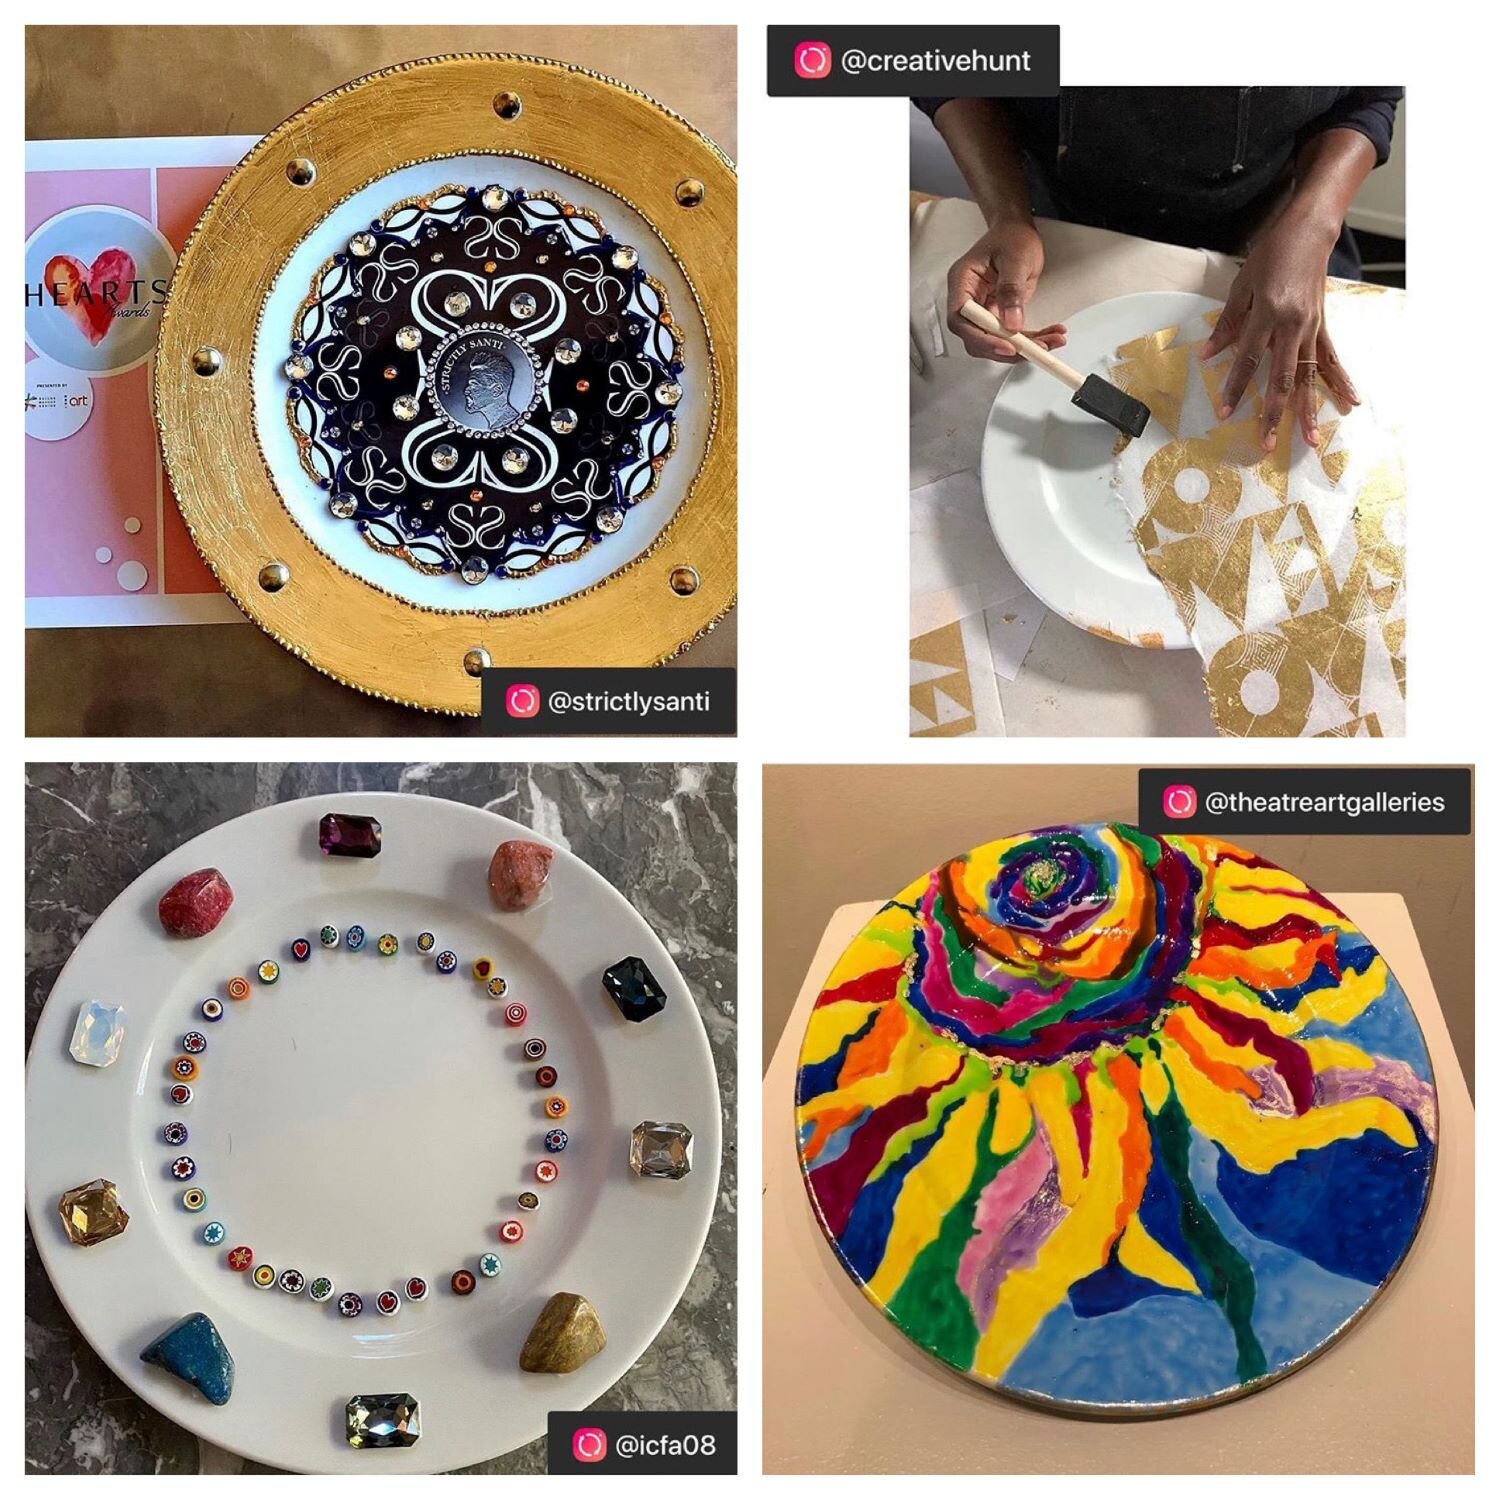  - Ahead of January’s HEARTS Awards, an auction of more than 70 one-of-a-kind plates  donated by Rosenthal and creatively transformed by artists, designers and celebrities will benefit national child hunger organization No Kid Hungry.  